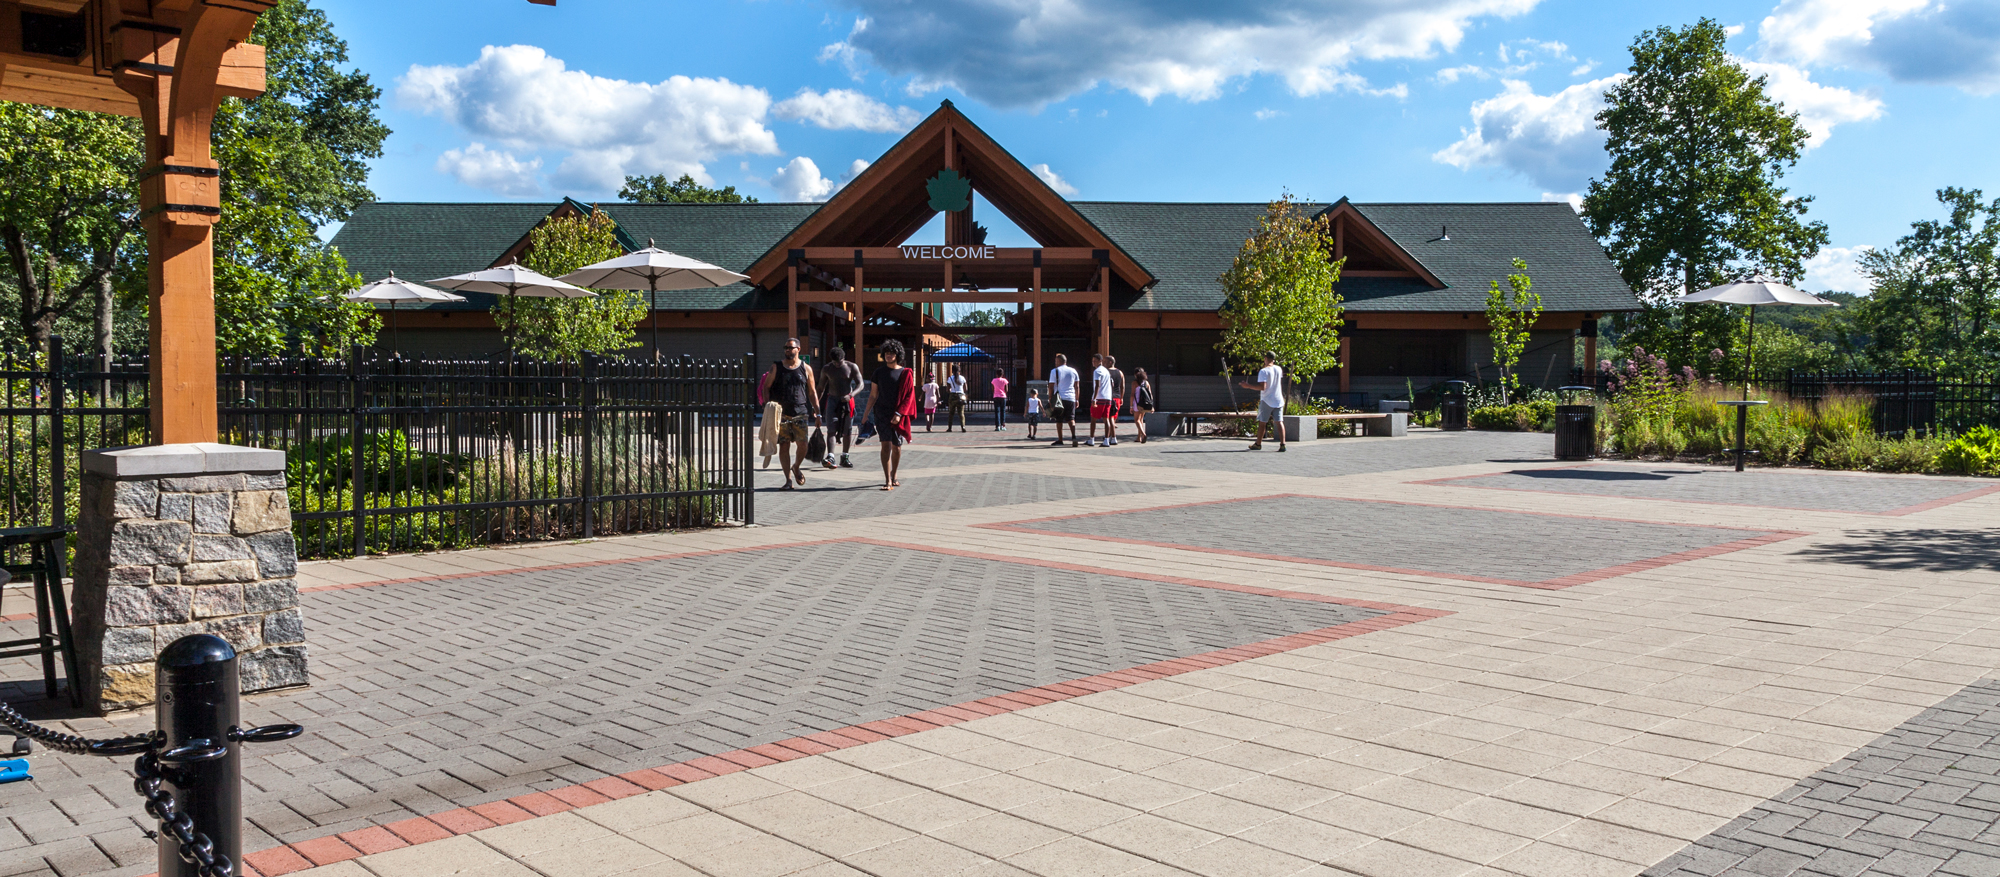 Patterned blocks of grey Eco-Priora, bordered by red and beige Europaver, serve as the main paver floor for visitors at FDR State Park.